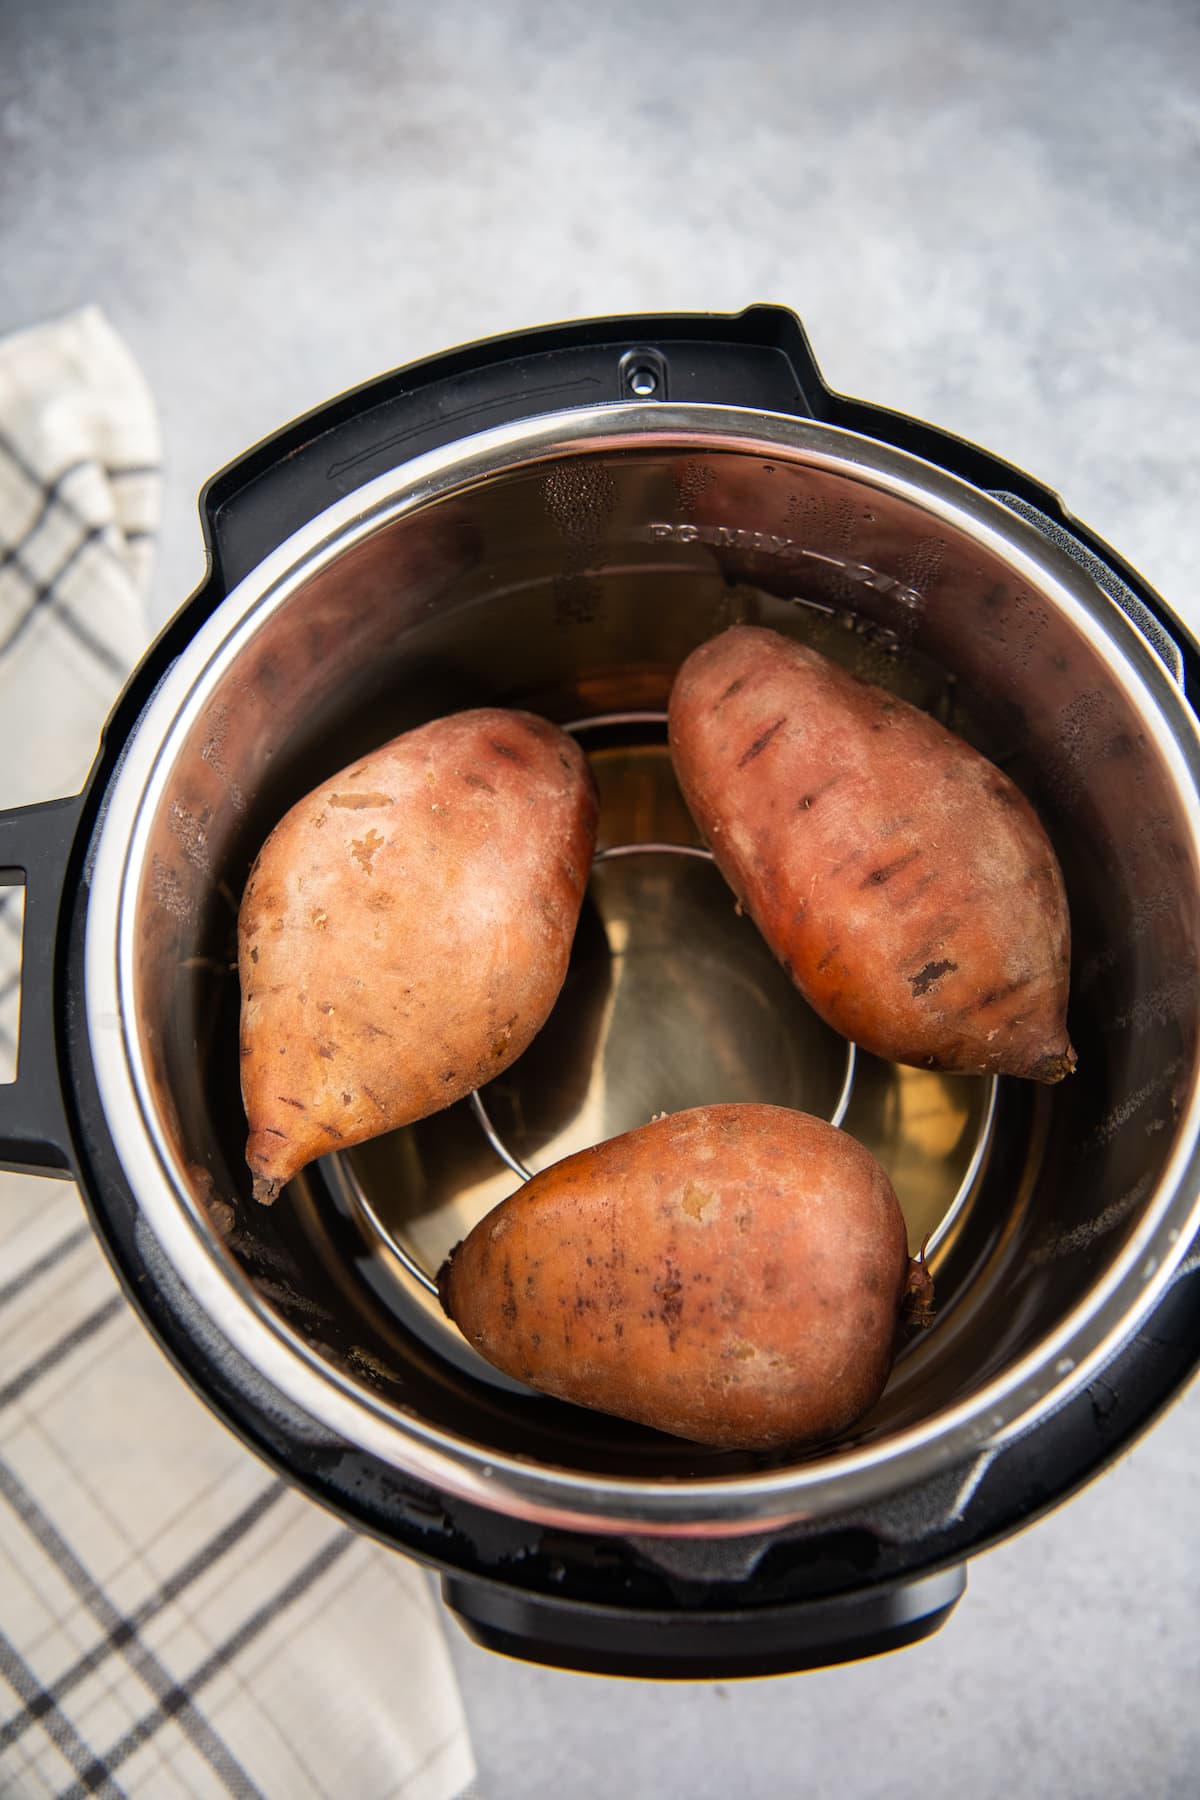 Overhead image of three cooked sweet potatoes inside an instant pot.